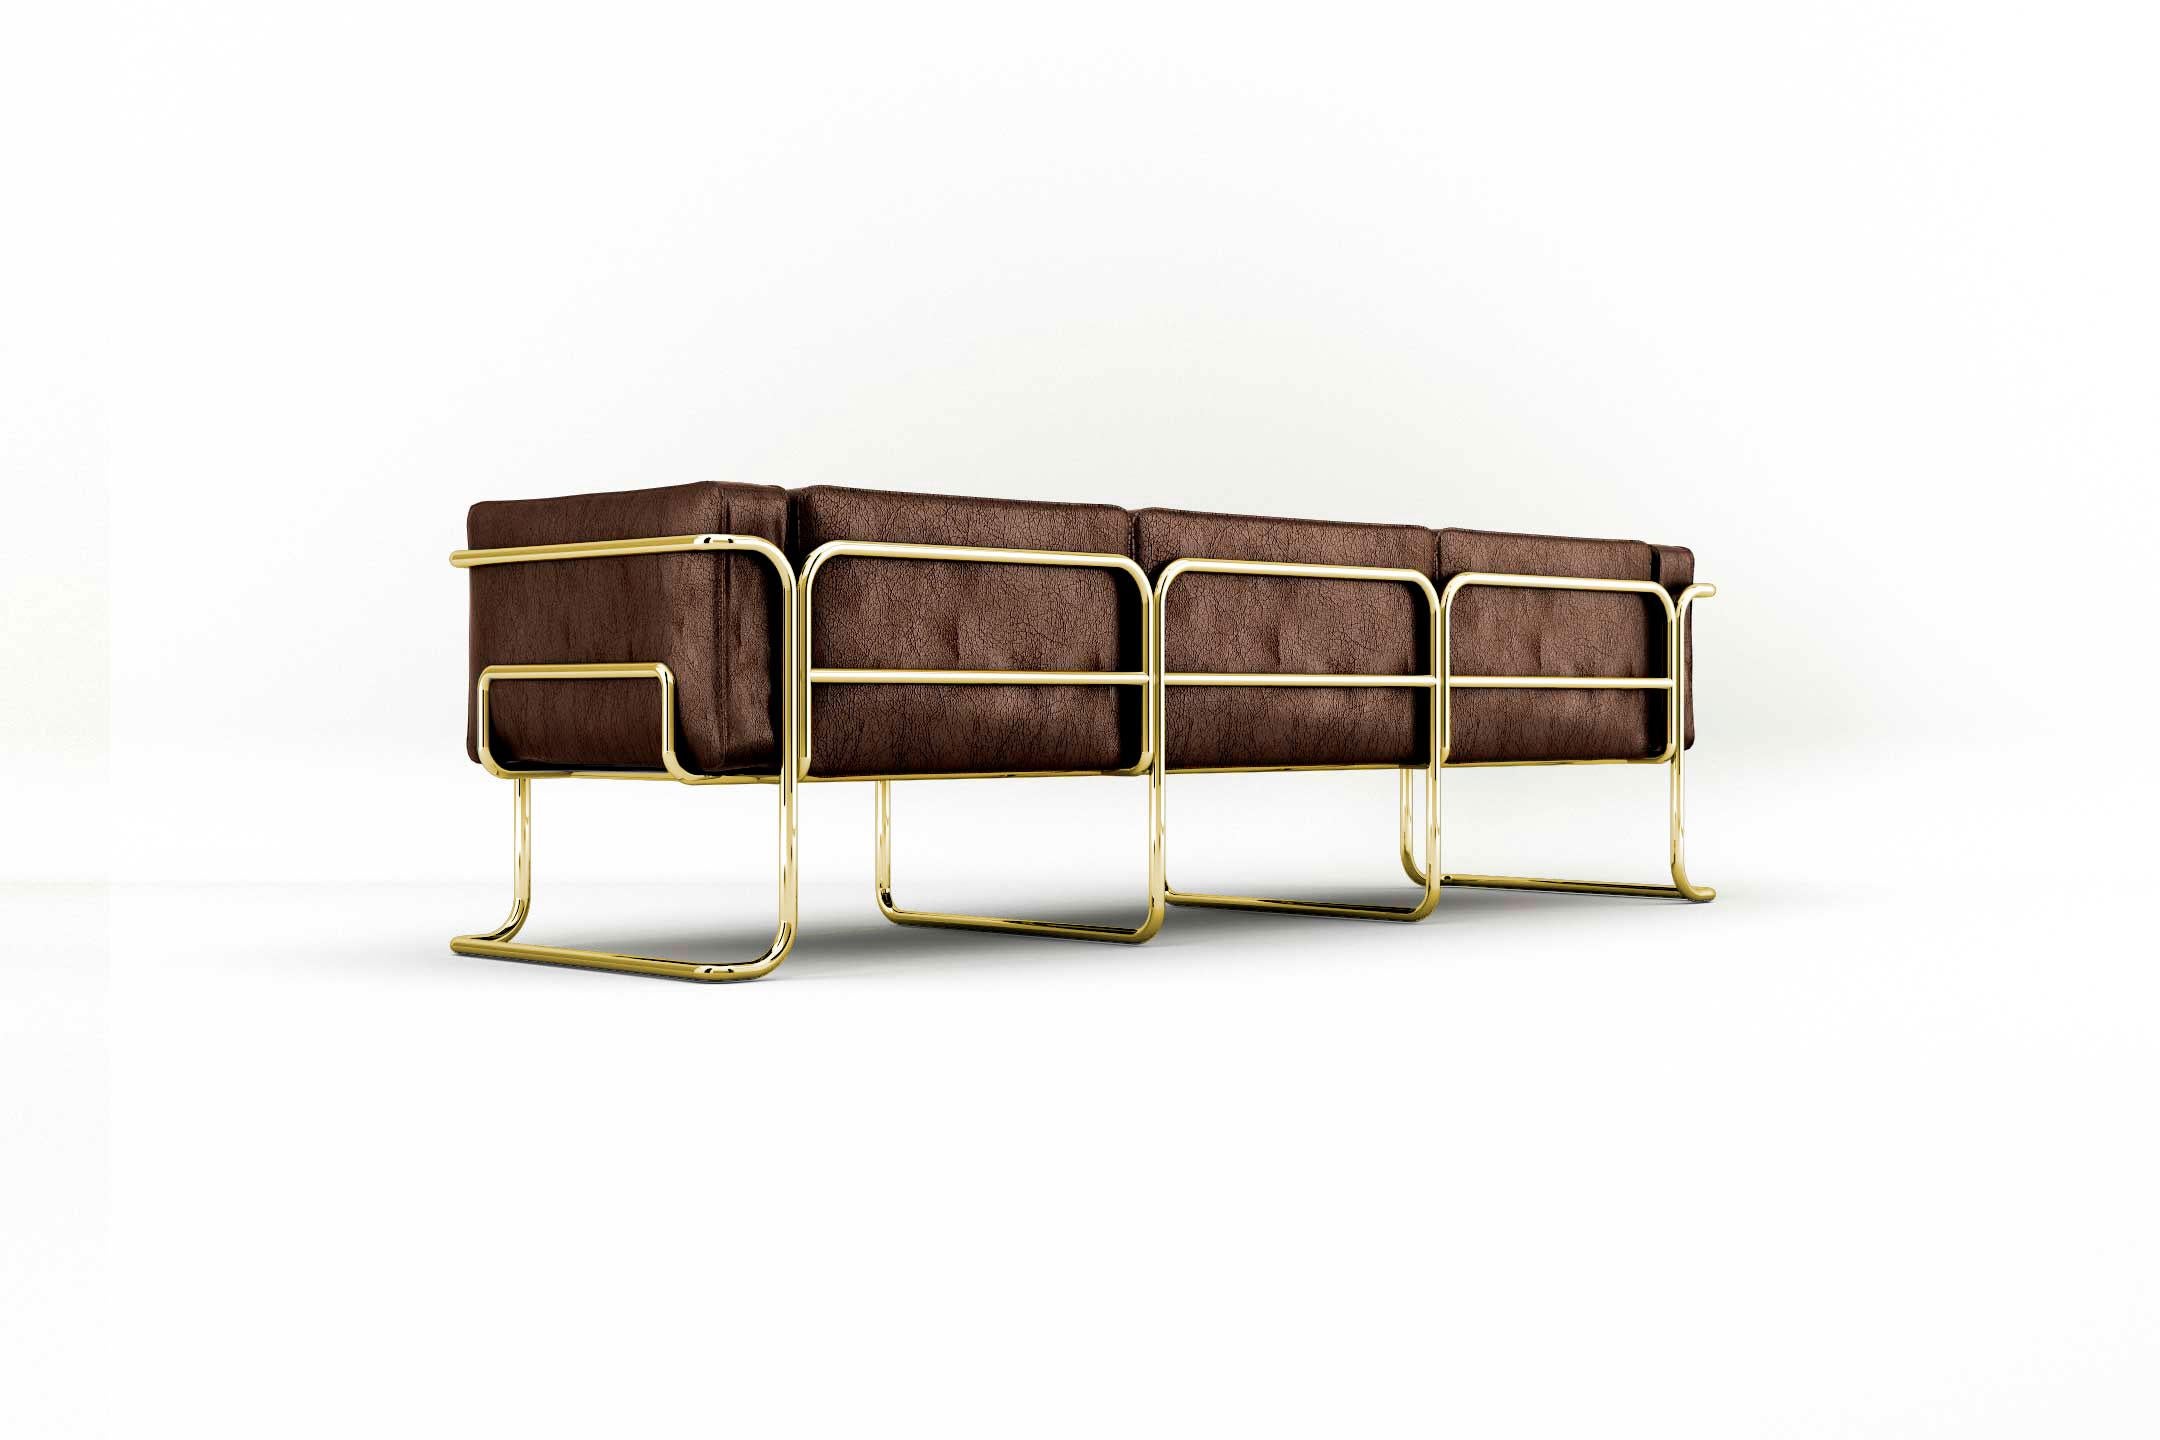 Polished Lotus 3 Seat Sofa - Modern Brown Leather Sofa with Brass Legs For Sale